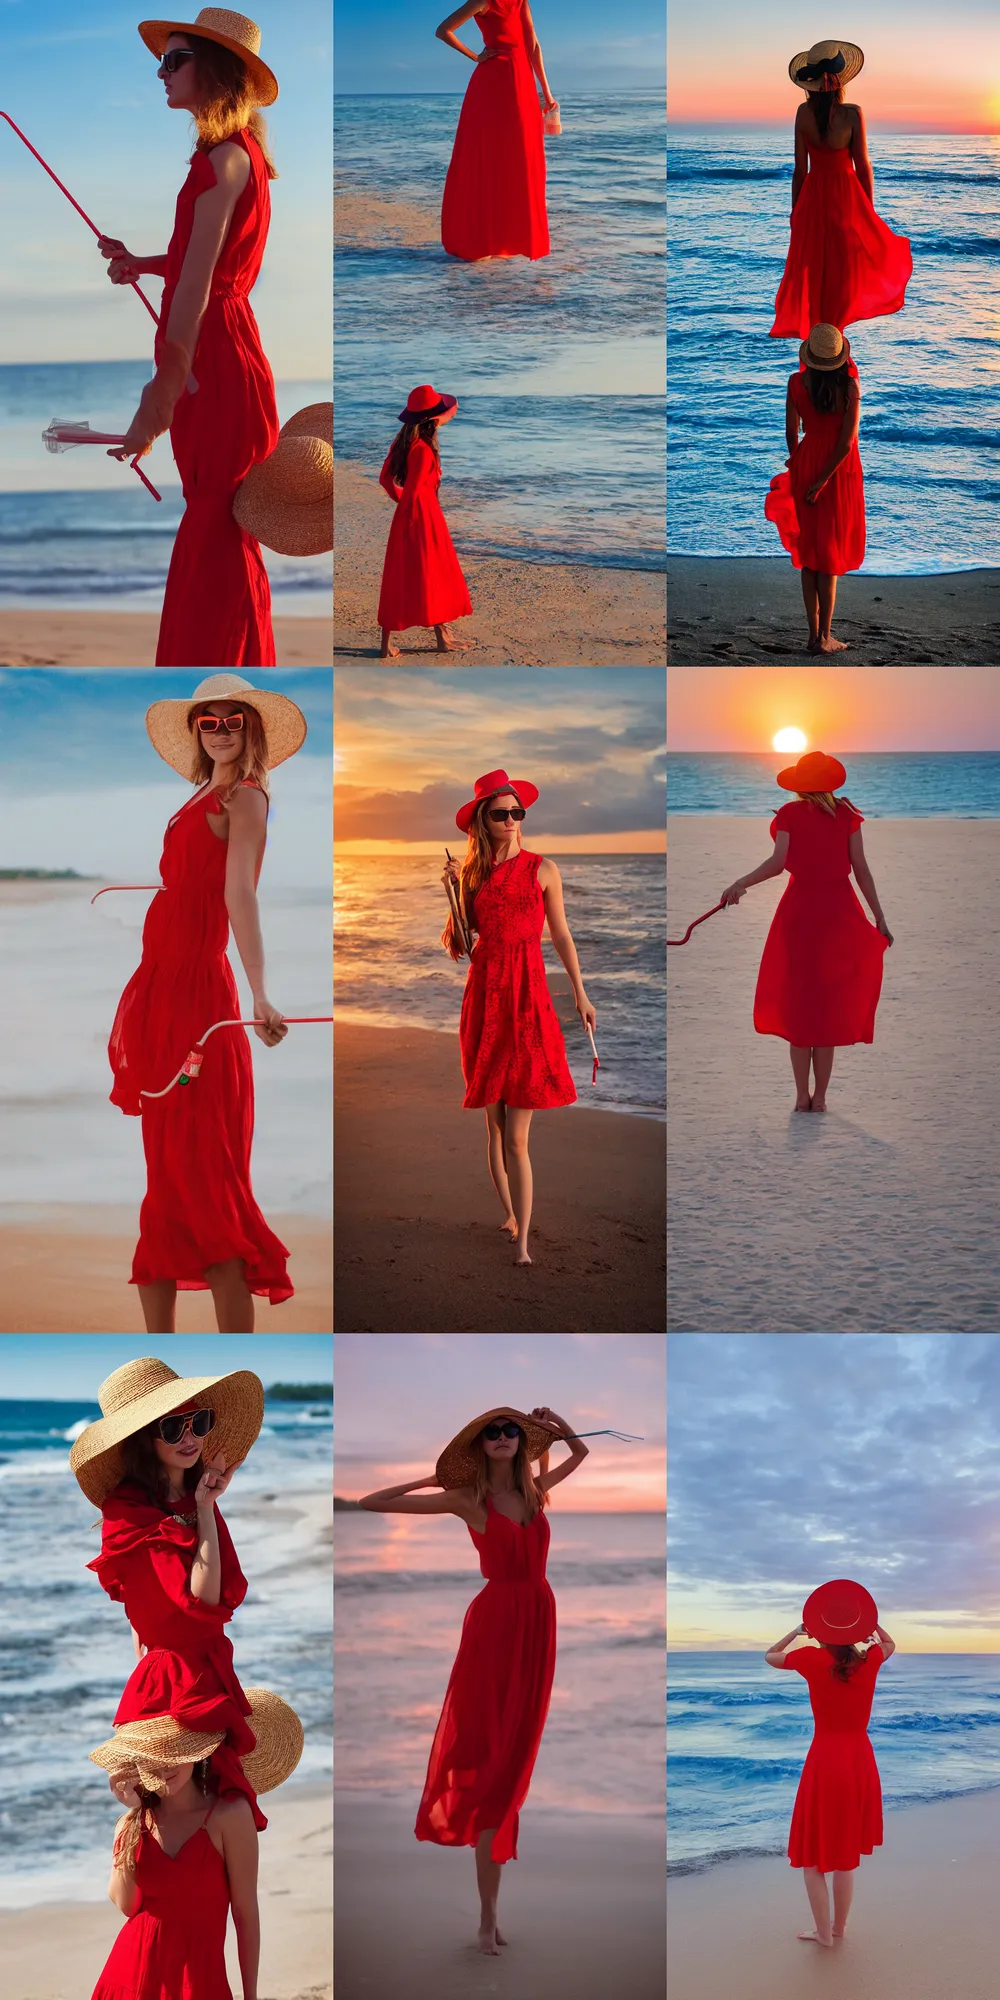 Prompt: “A photograph of a young woman with sunglasses, wearing red dress and a straw hat standing on a beach with the sunset in the background, 4K, high quality, detailed.”